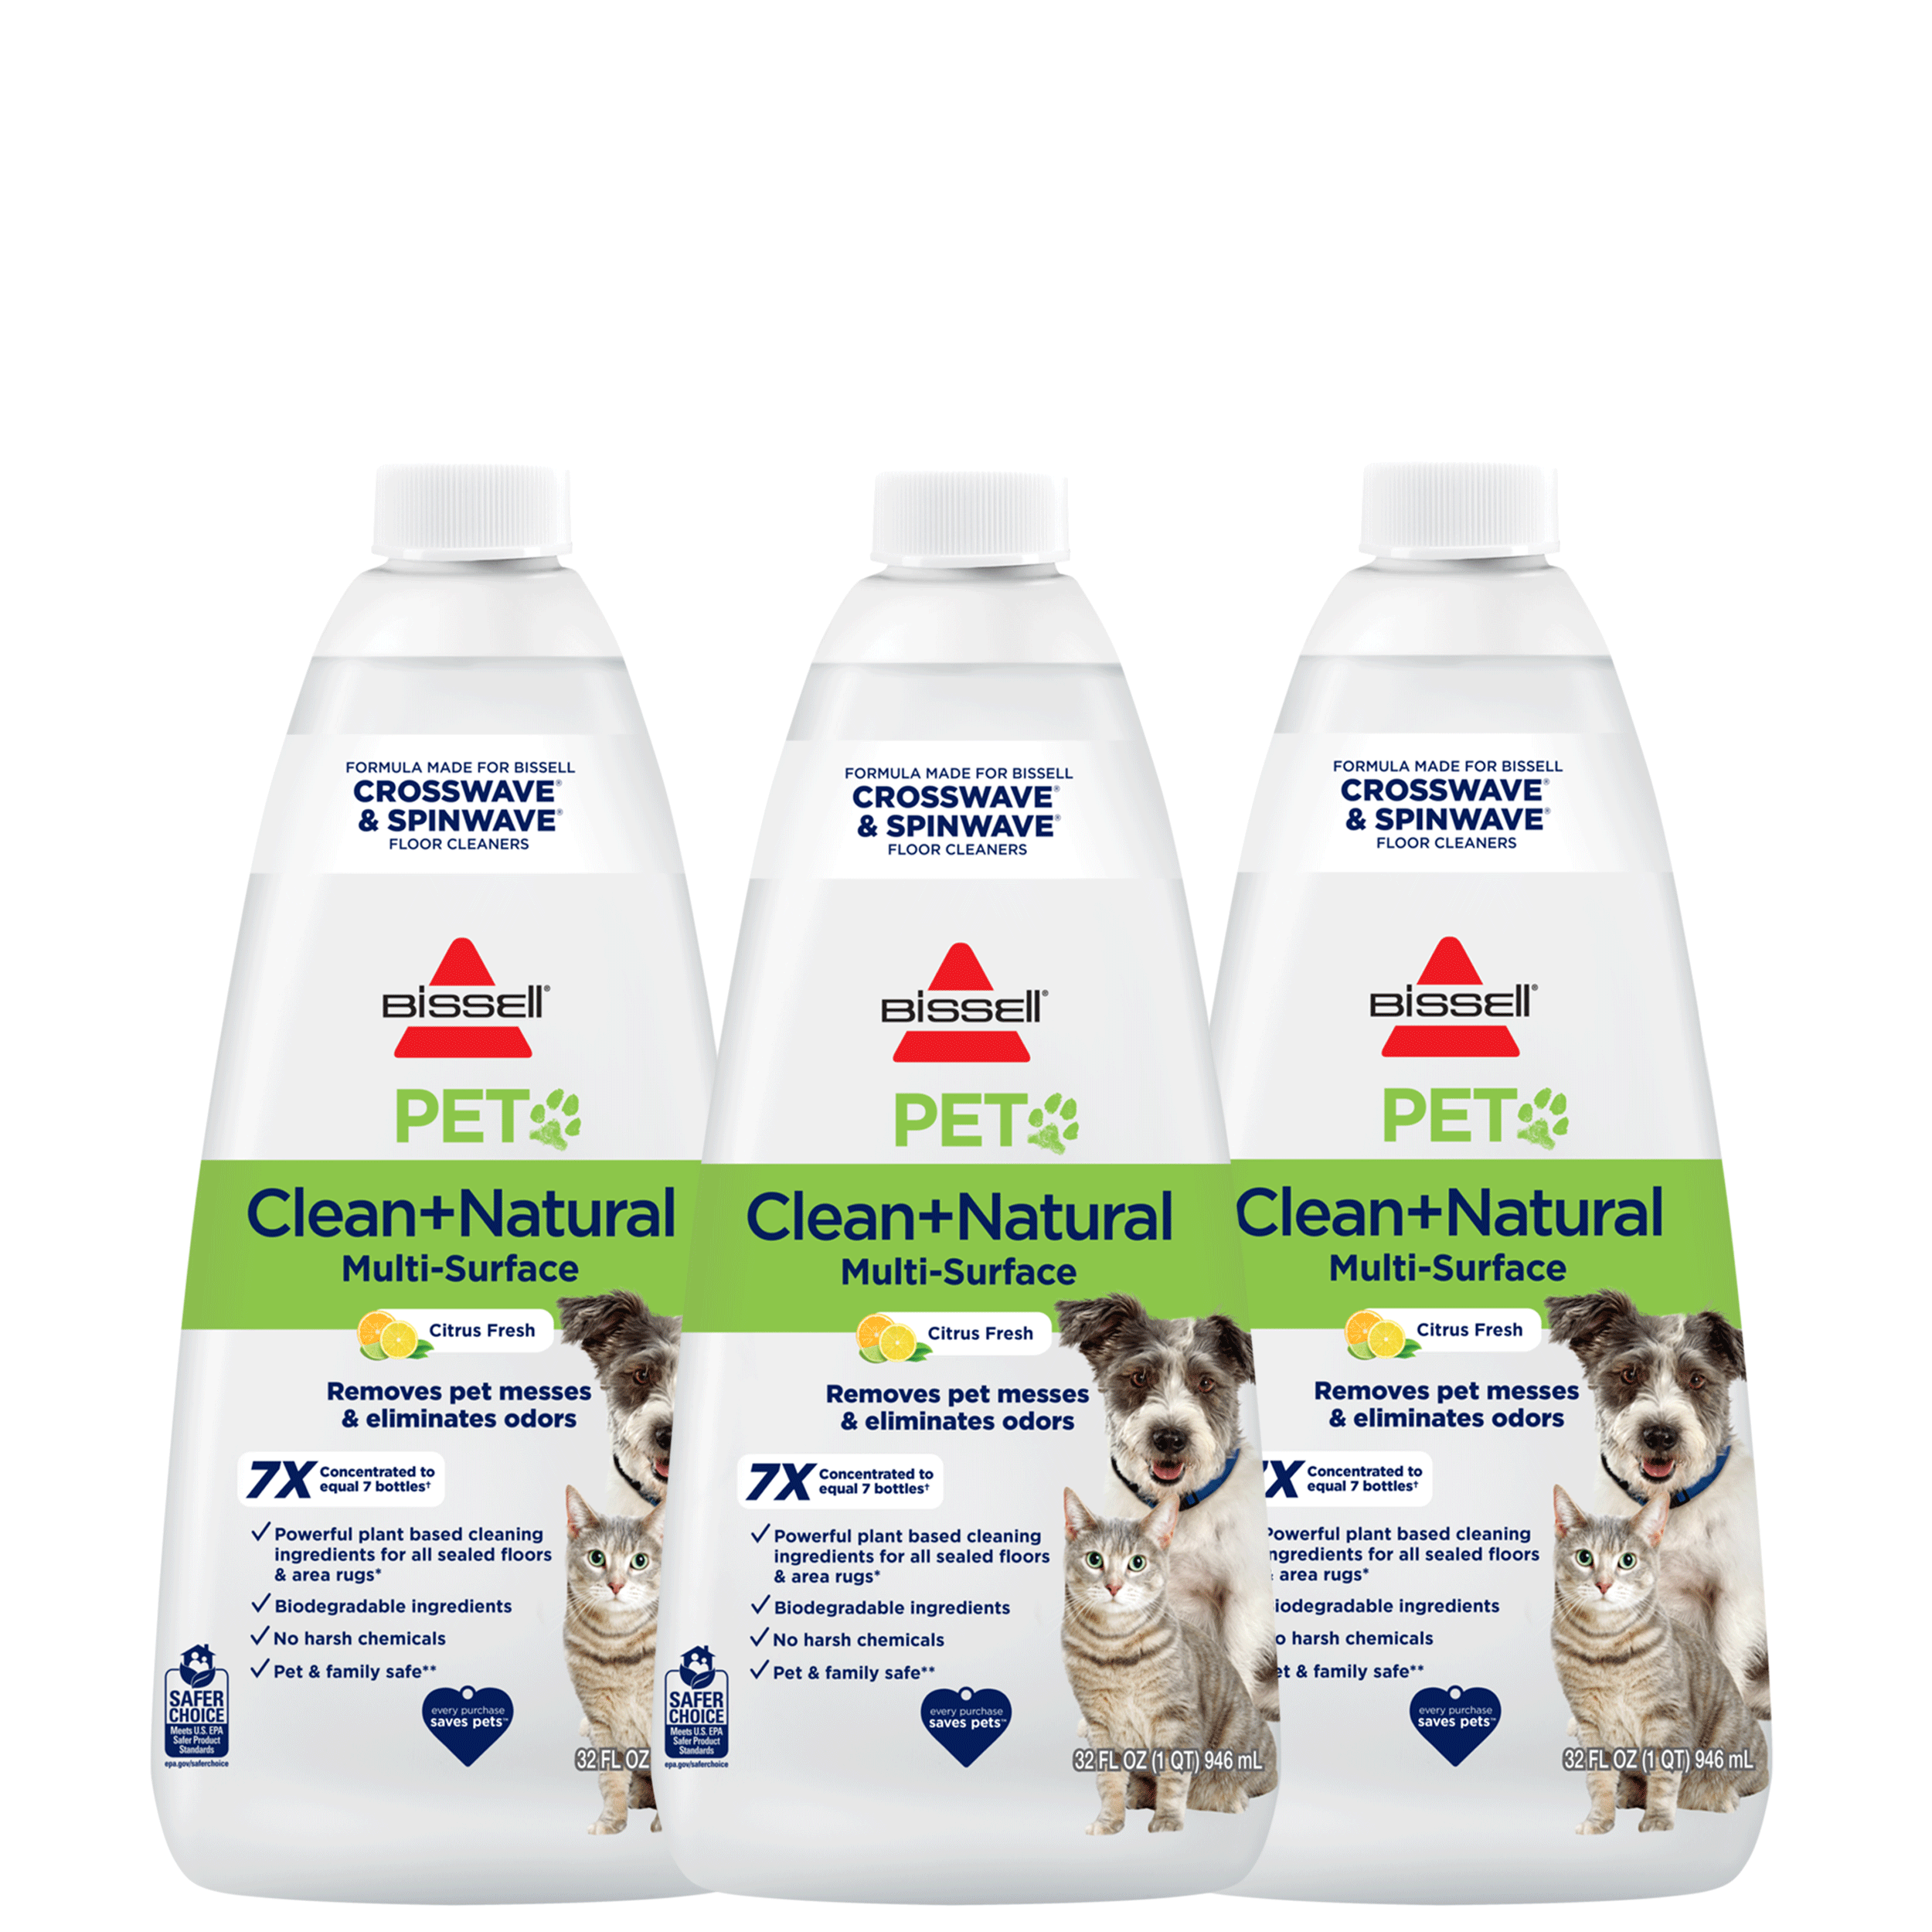 Pet clean. Bissell Pet. BUISSELL natural Multi surface Floor Cleaning solution. Bissell logo.